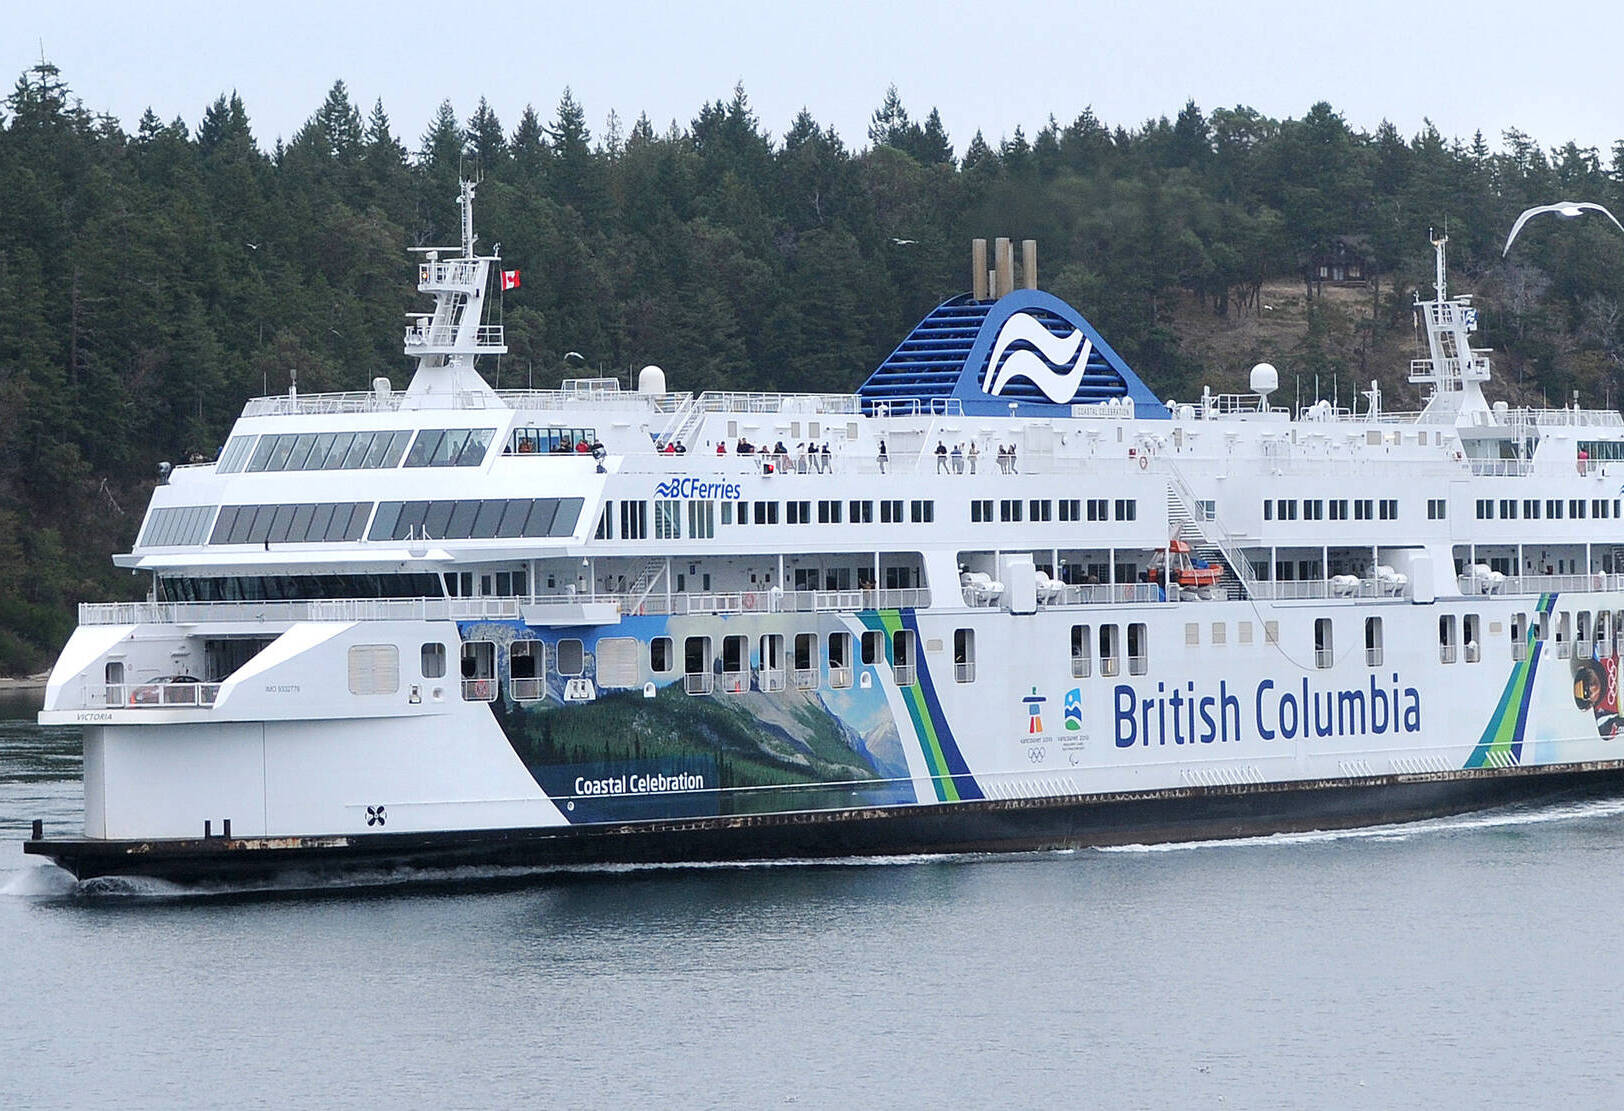 Coastal Celebration sails through Active Pass, which it won’t for the next several months, says BC Ferries. (Black Press Media file photo)